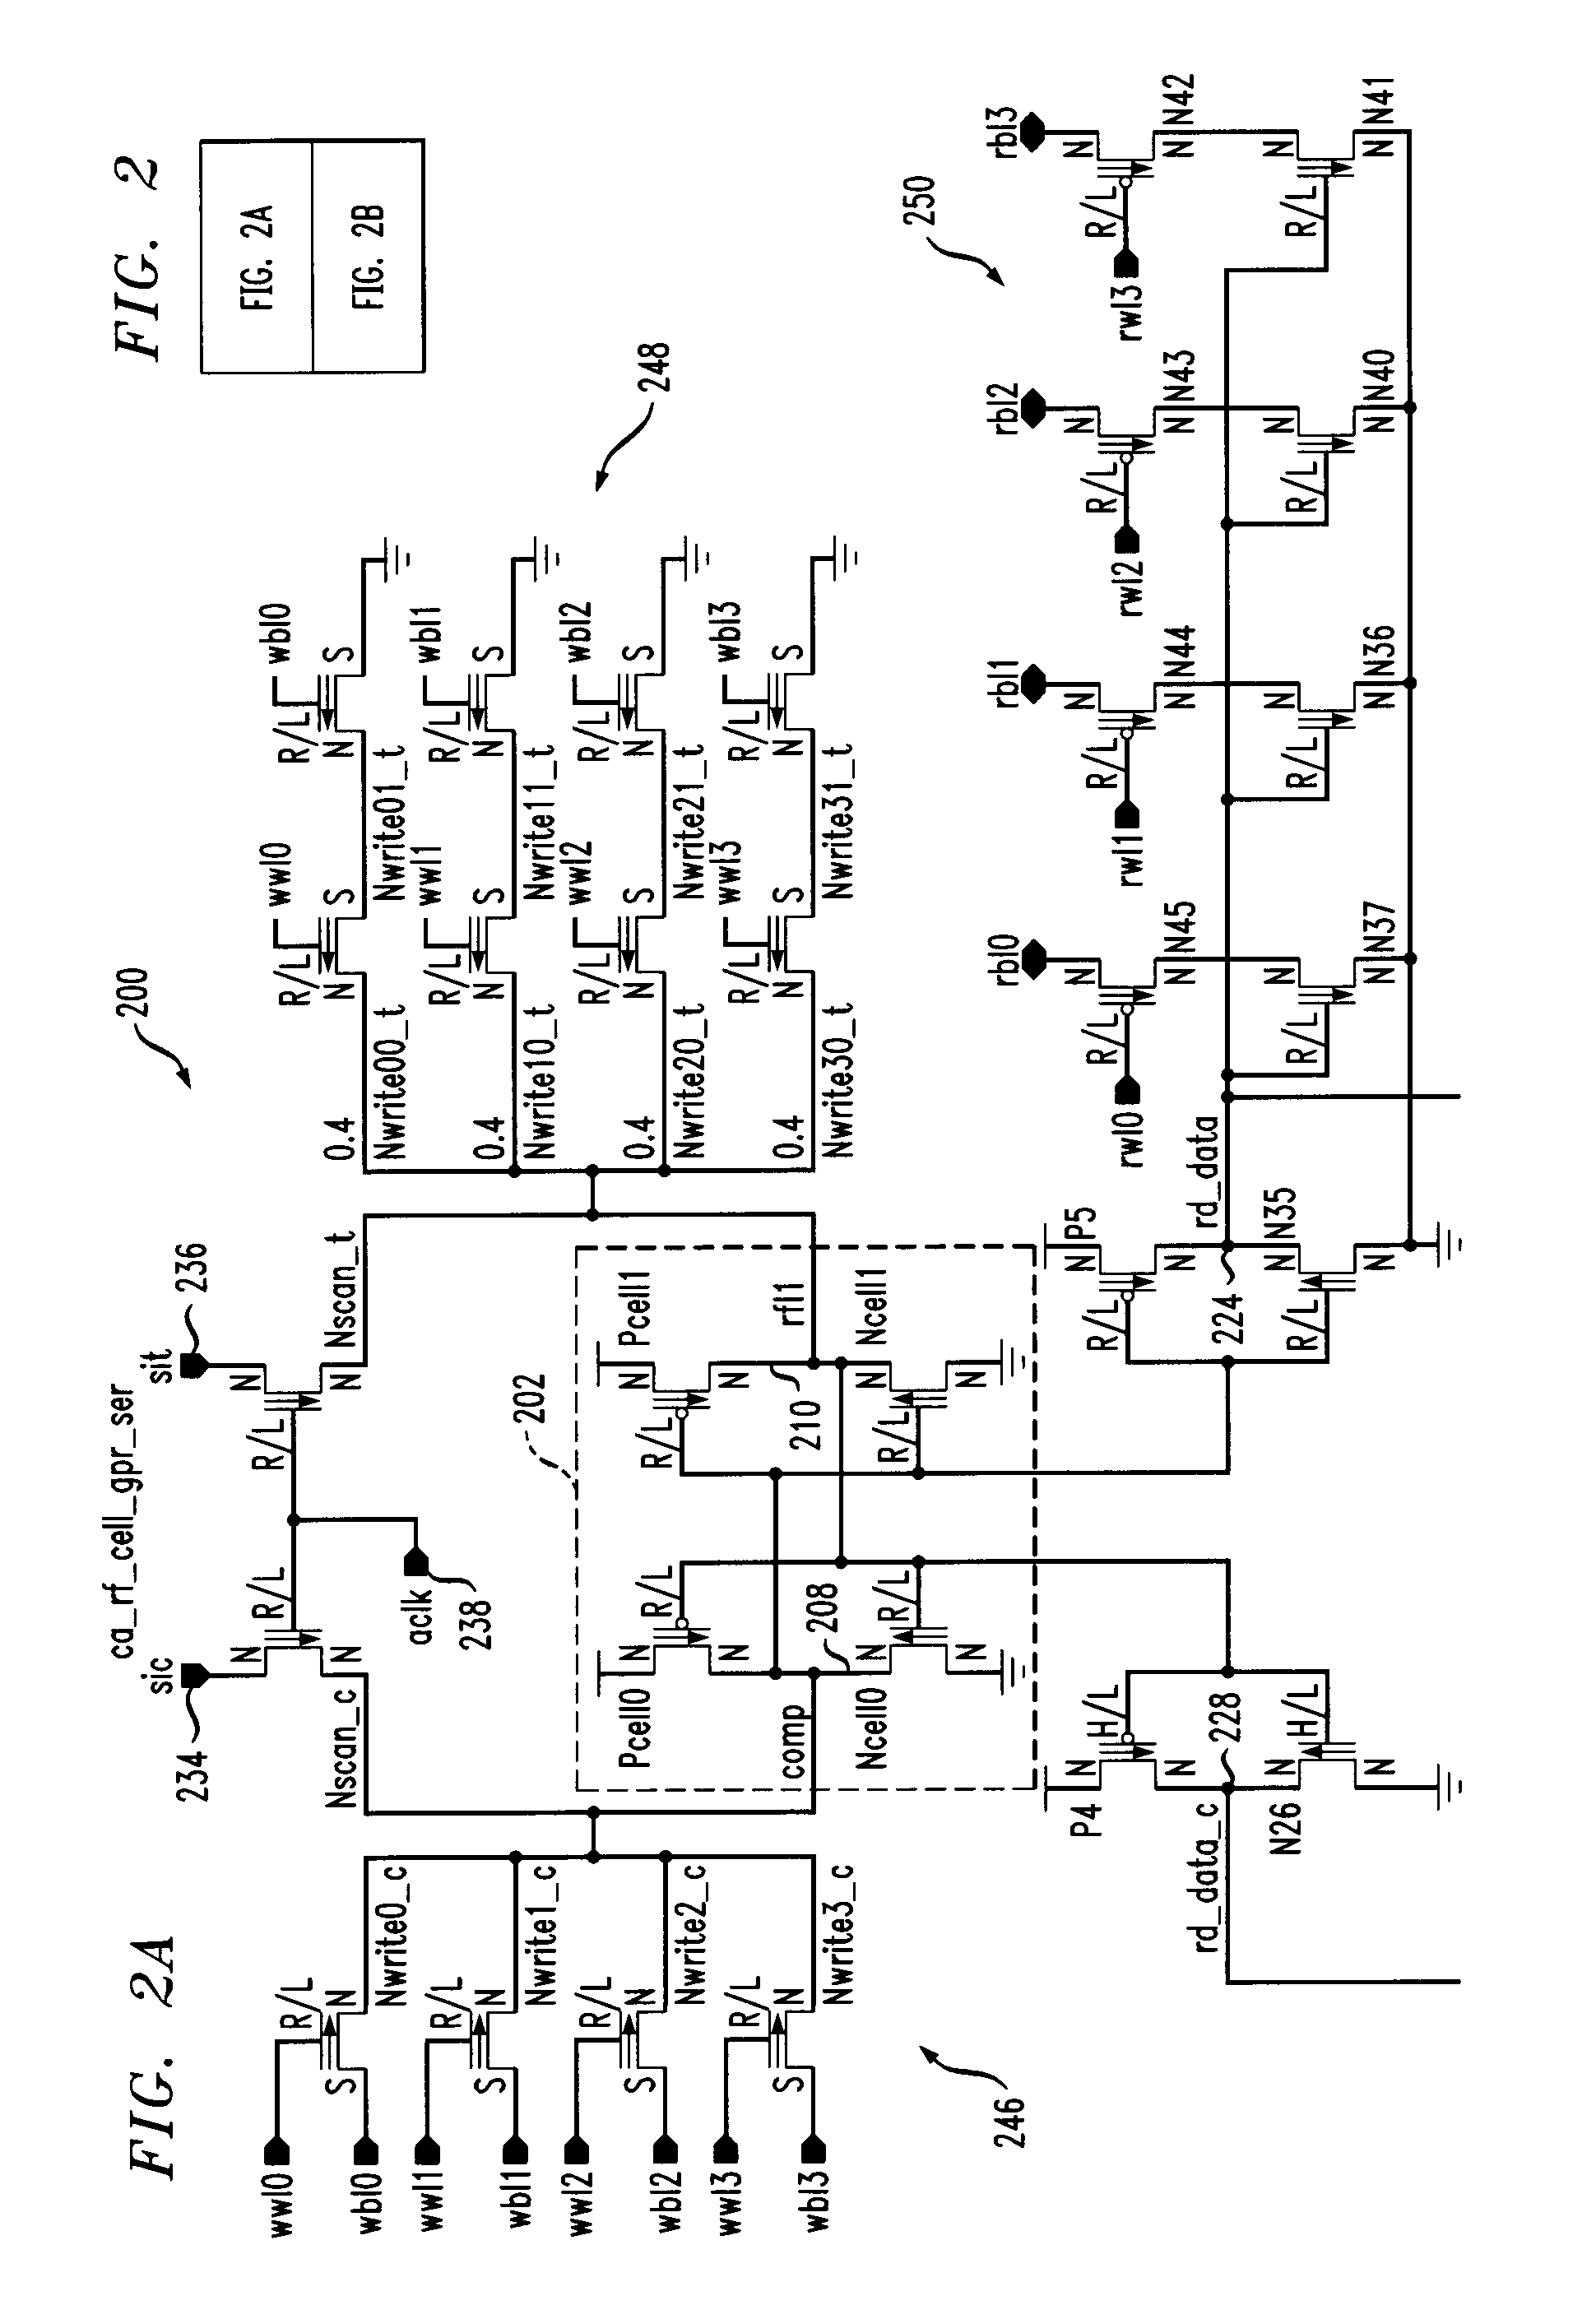 Register file cell with soft error detection and circuits and methods using the cell